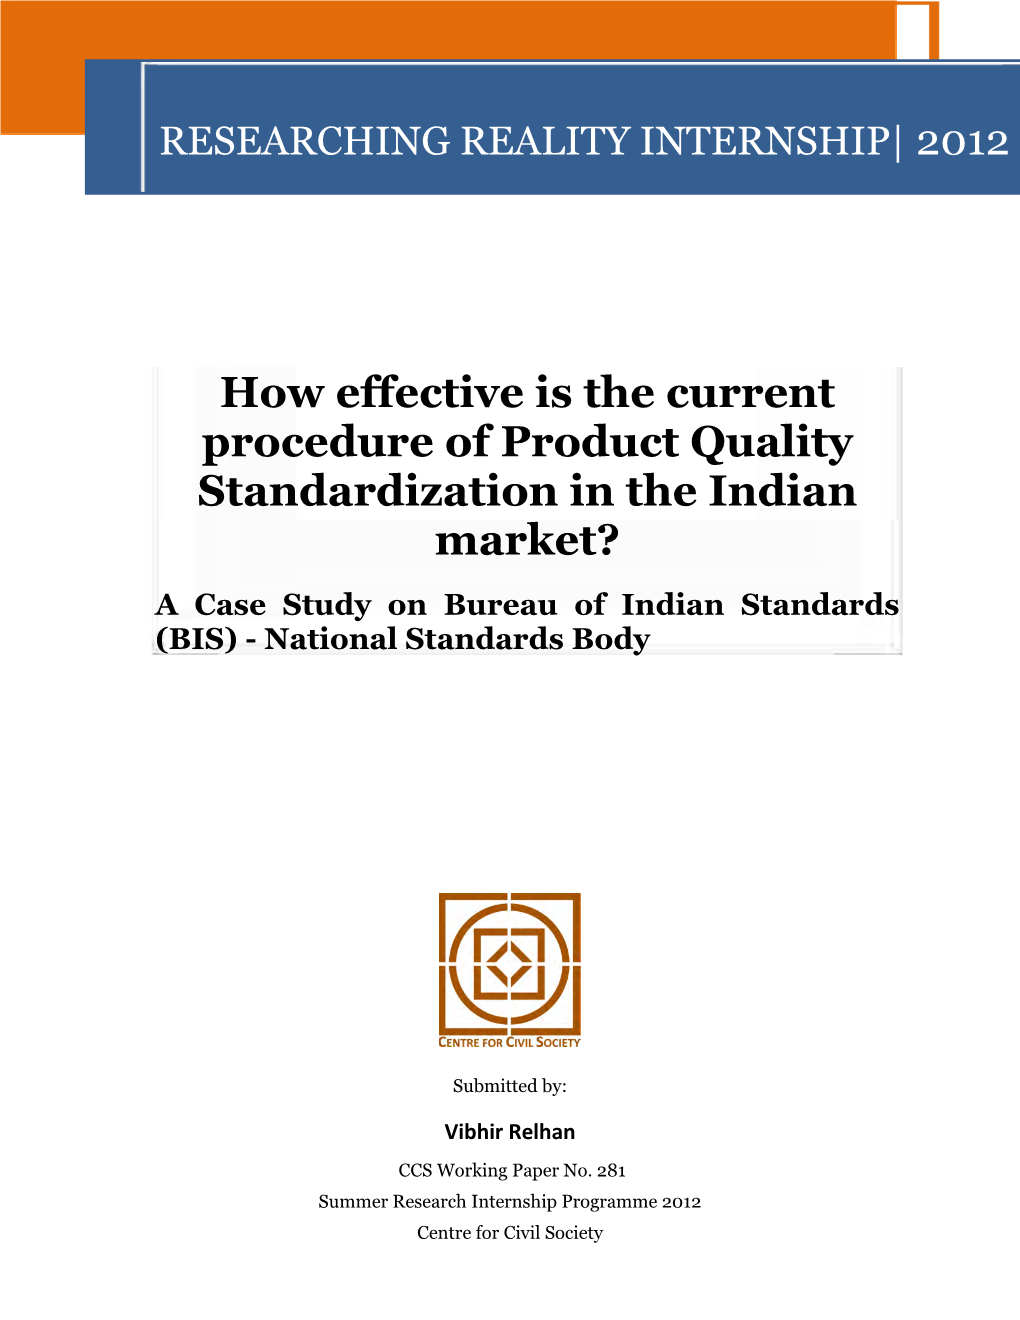 Product Quality Standardization in the Indian Market? a Case Study on Bureau of Indian Standards (BIS) - National Standards Body